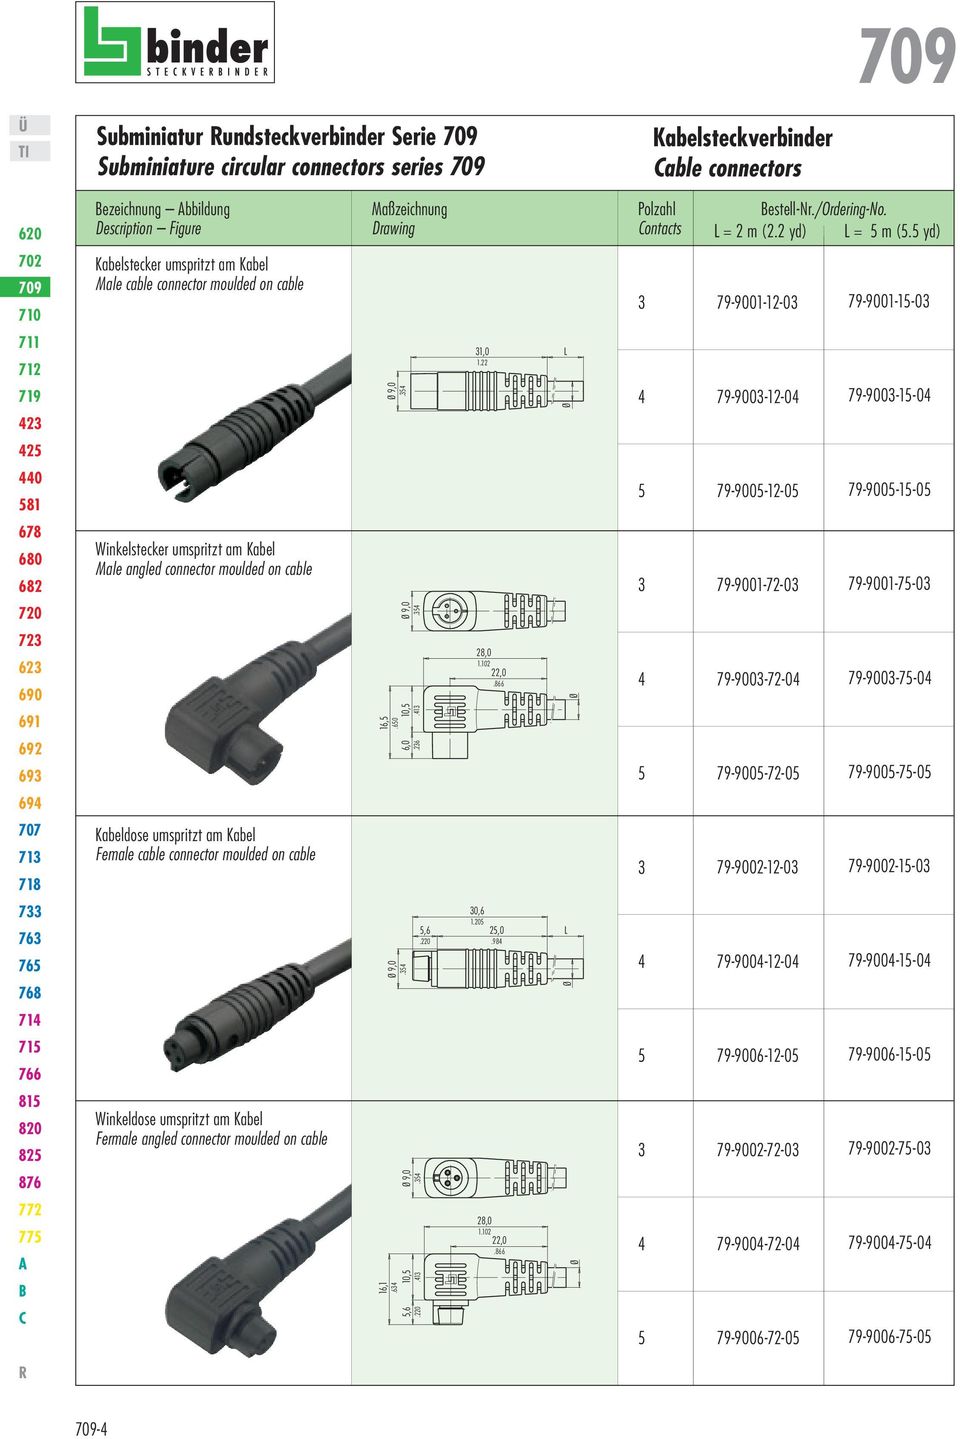 moulded on cable Winkeldose umspritzt am Kabel Fermale angled connector moulded on cable Maßzeichnung Drawing 9,0. 16,.60 9,0. 16,1.6 9,0. 10,.1 6,0.26 9,0. 10,.1,6.220,6.220 1,0 1.22 28,0 1.102 22,0.